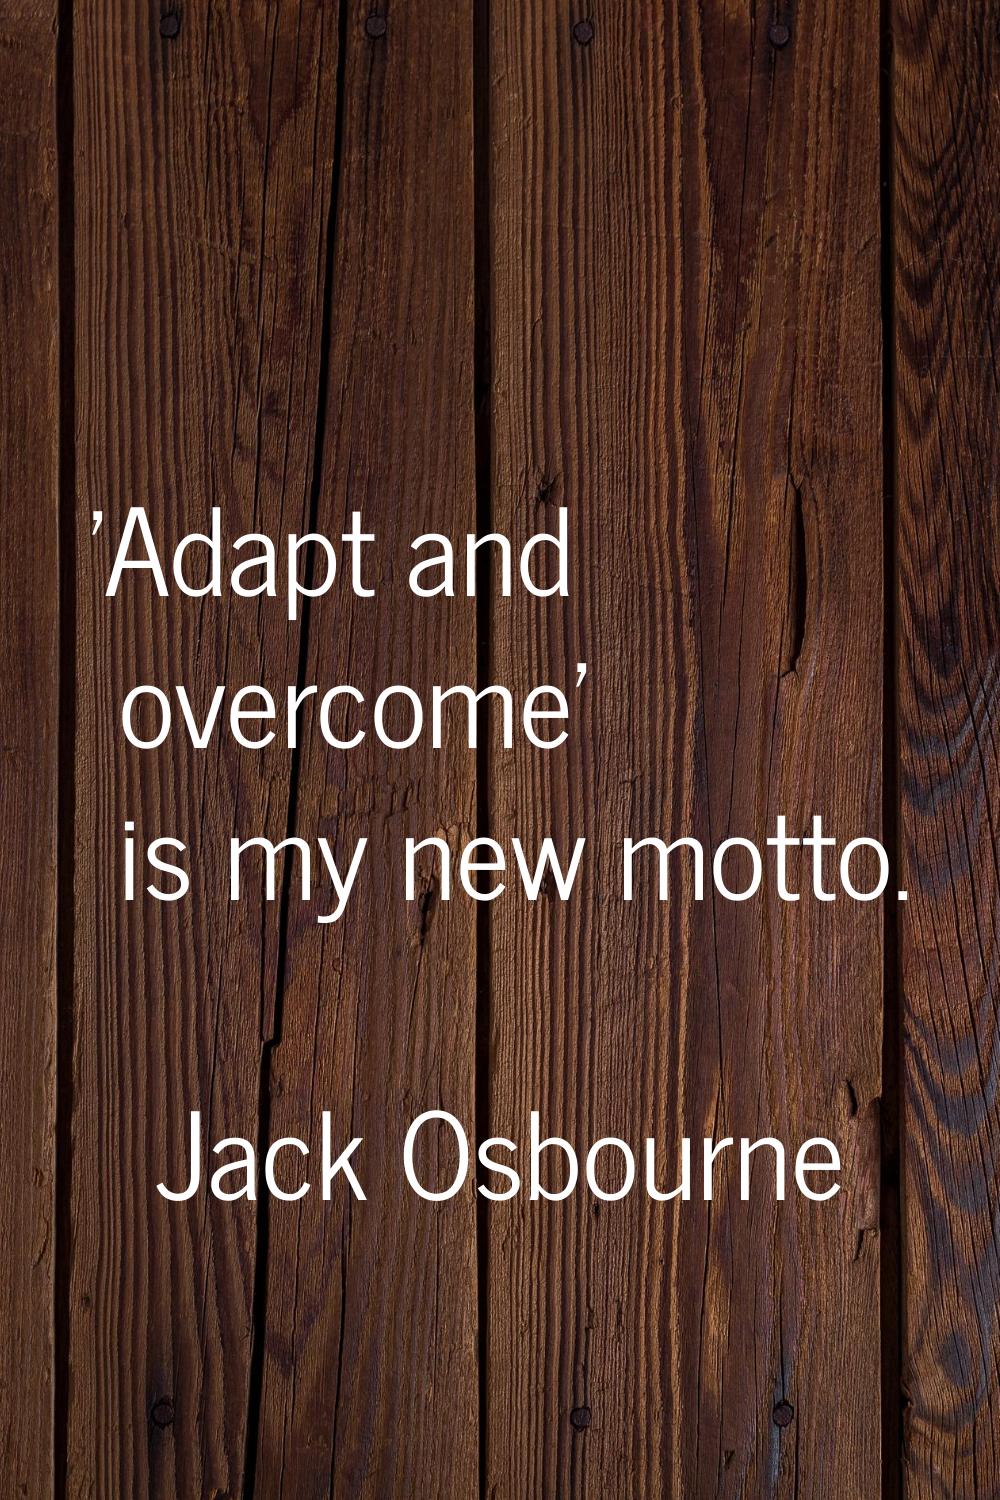 'Adapt and overcome' is my new motto.